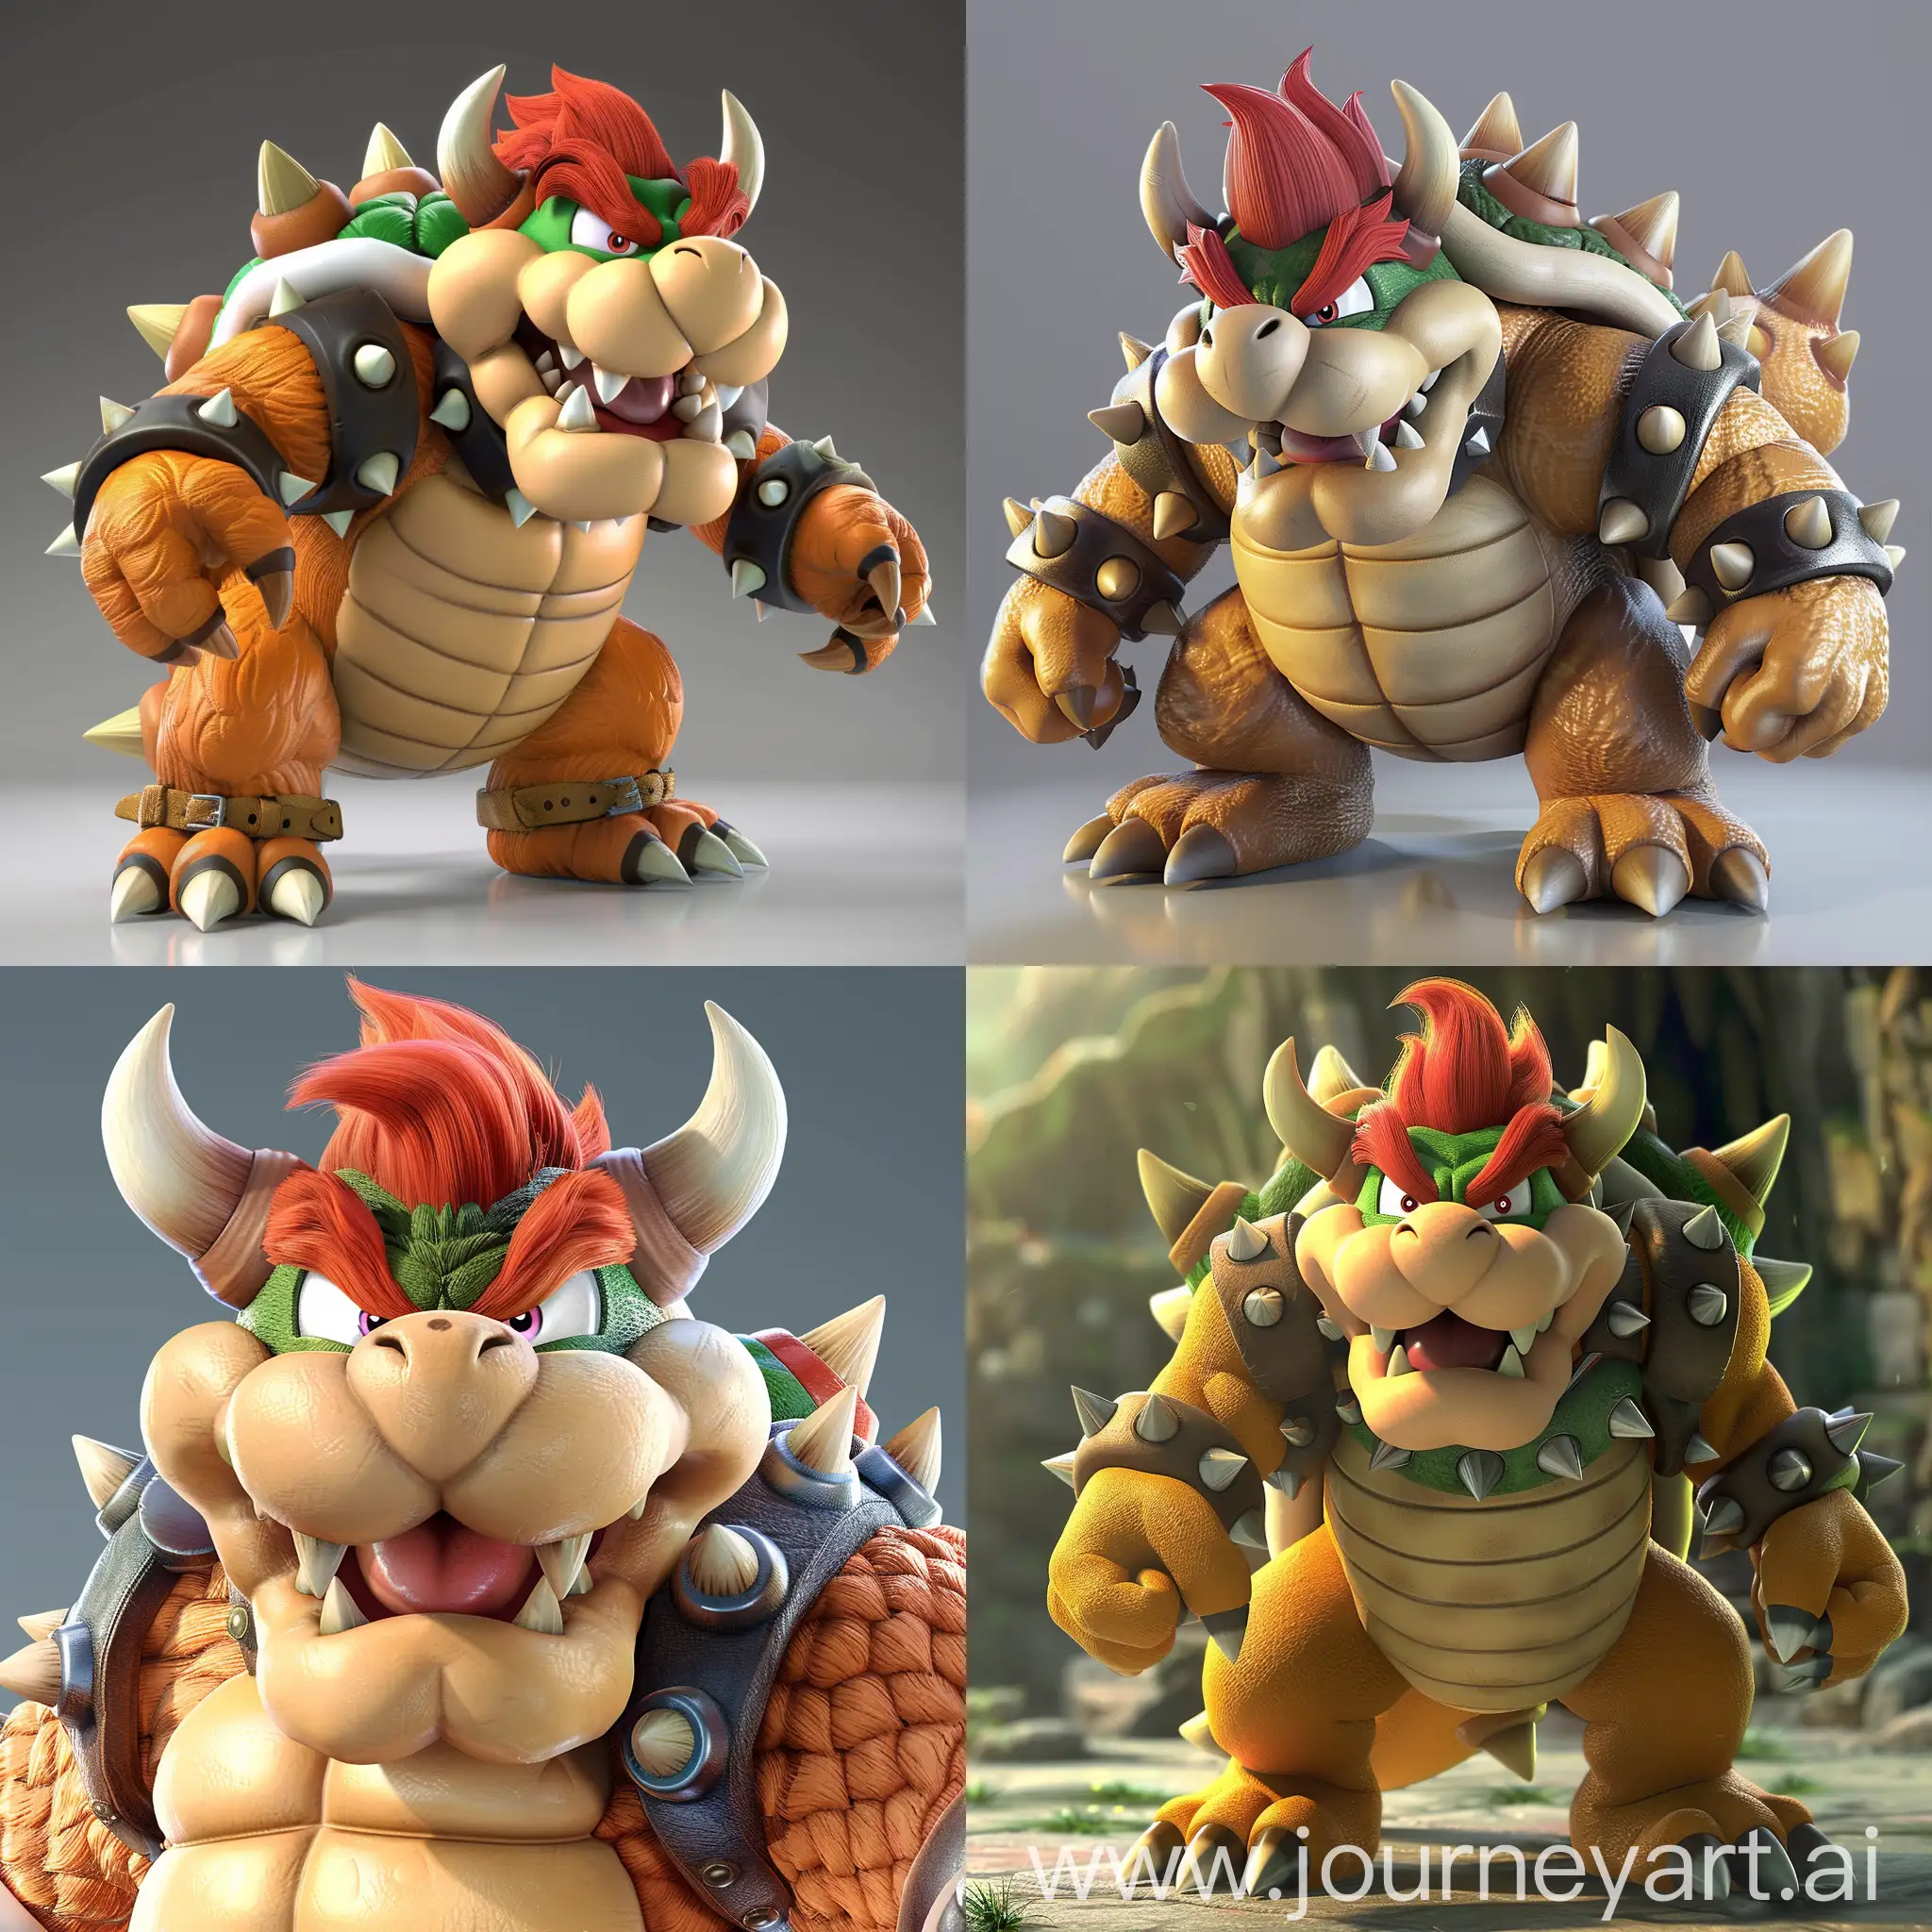 Majestic-Bowser-Digital-Art-Enigmatic-Power-in-a-11-Aspect-Ratio